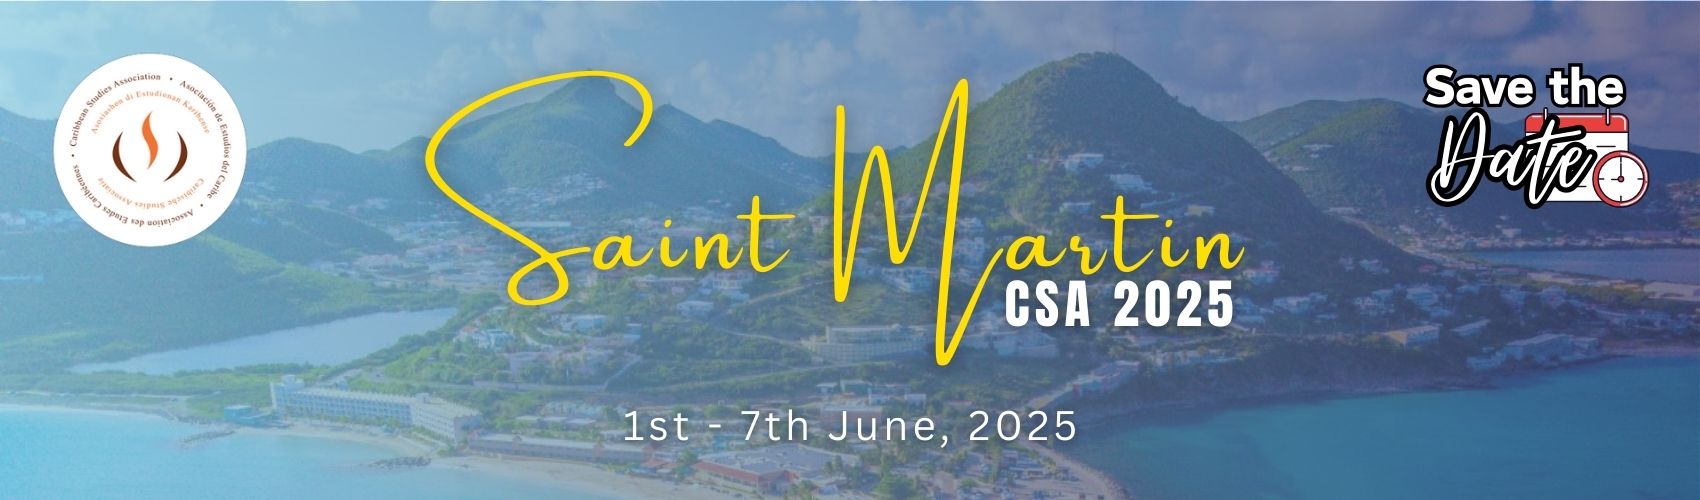 2025 CSA Conference save the date